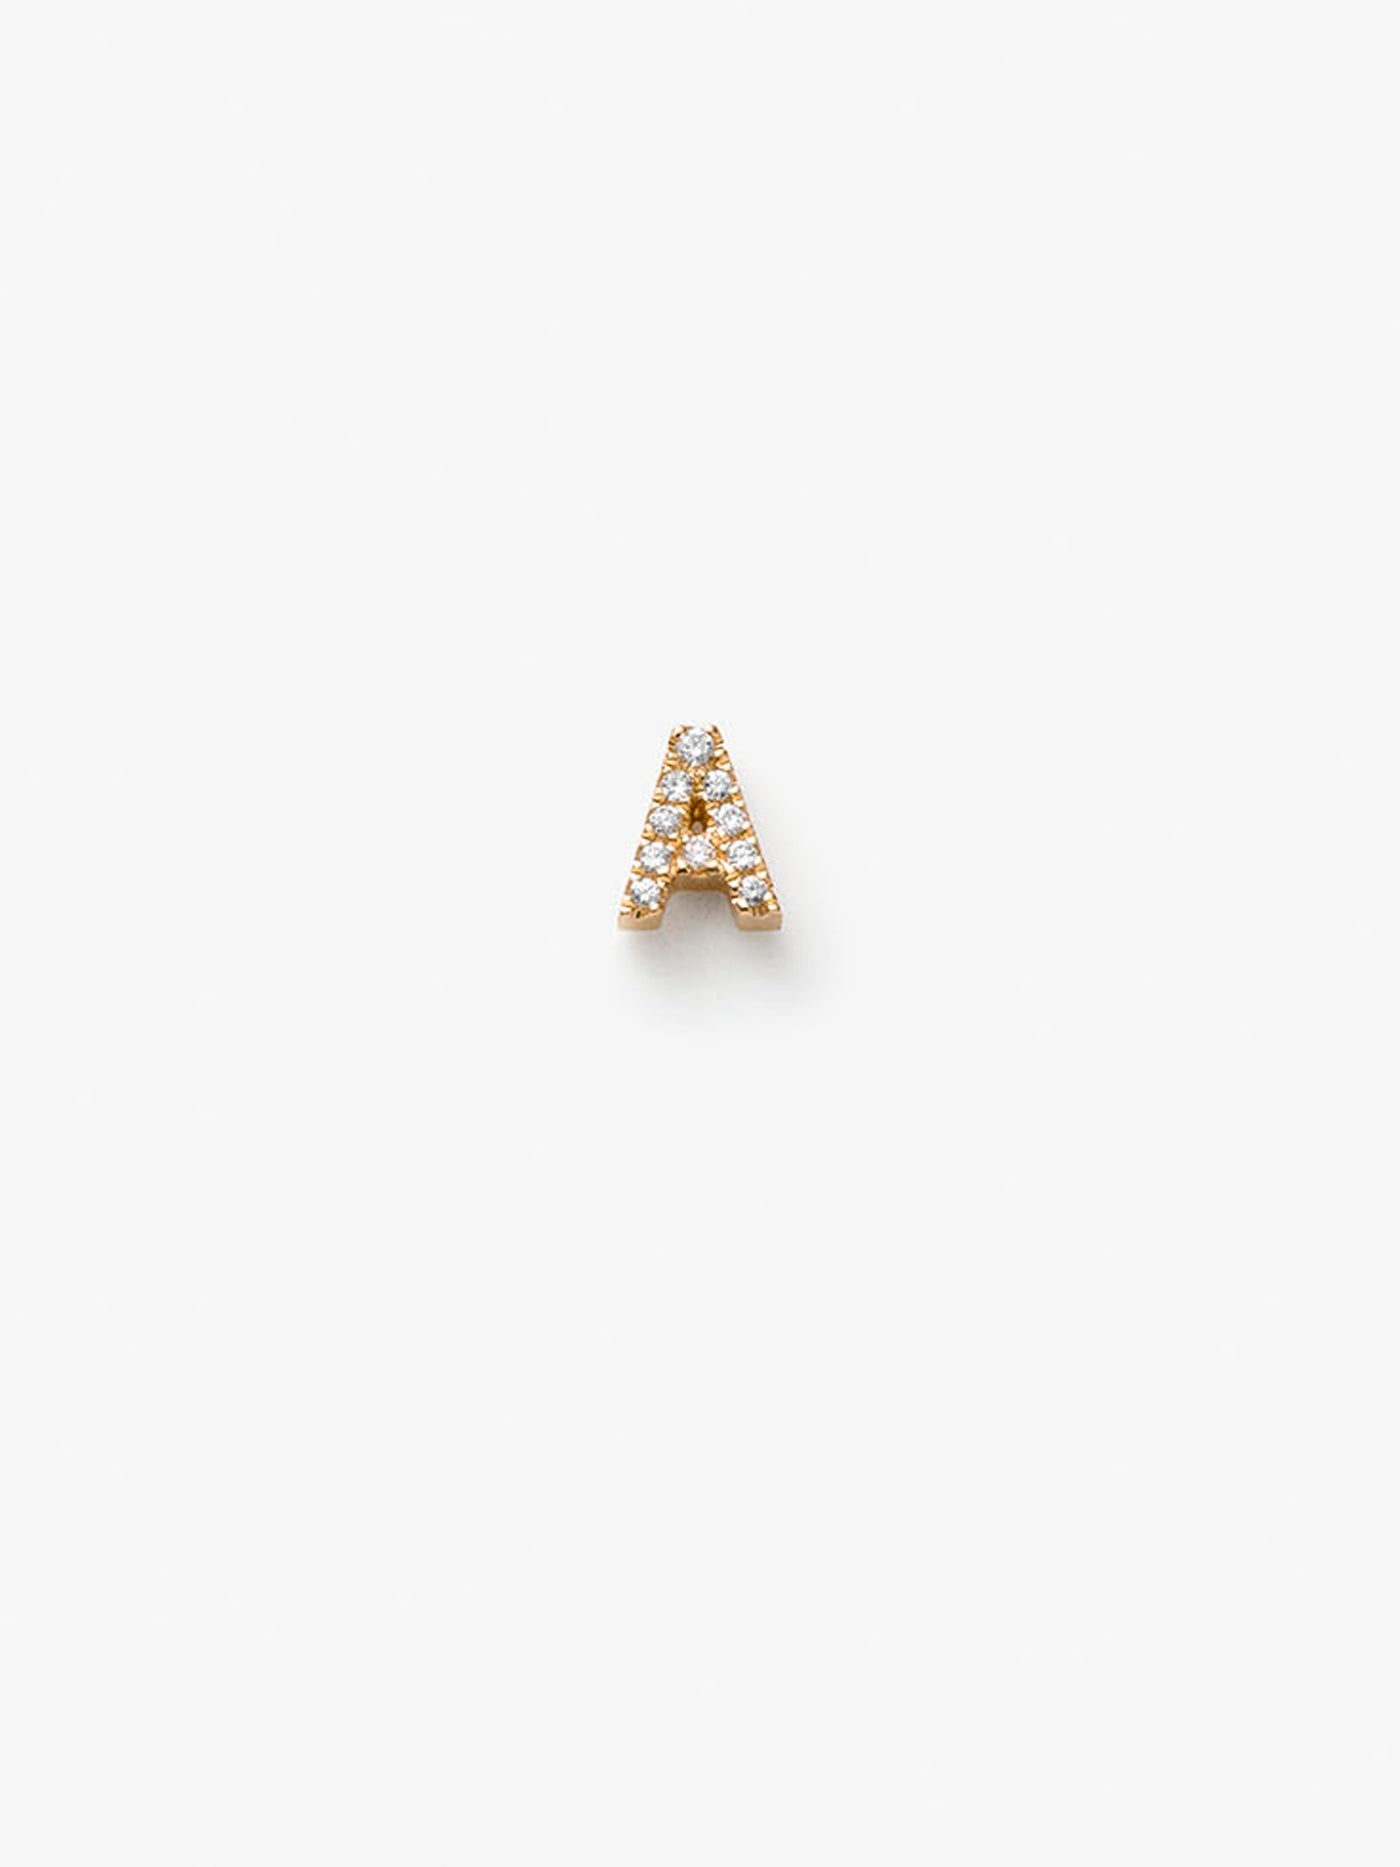 Letter A in Diamonds and 18k Gold